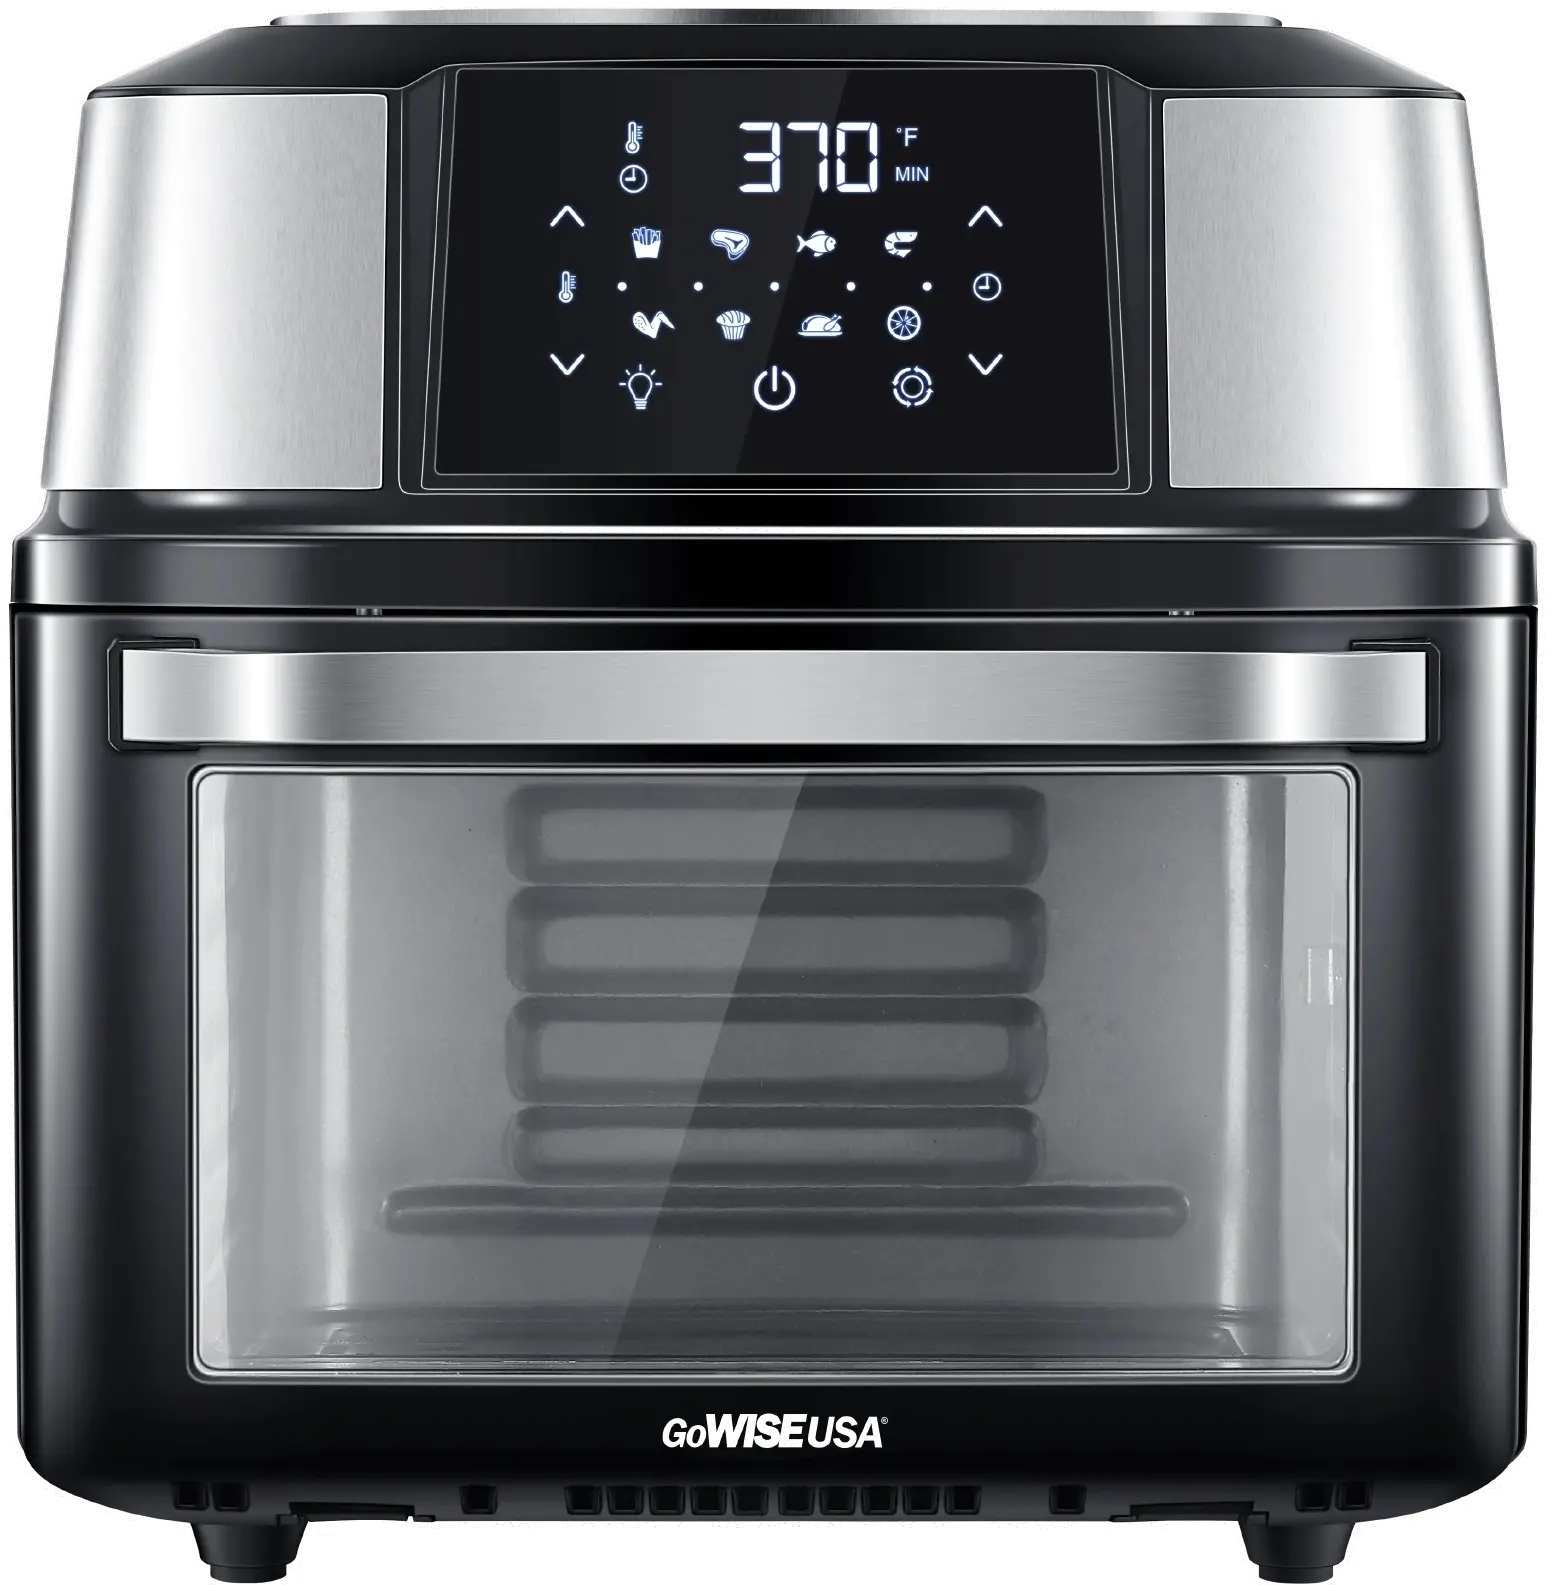 https://static.rcwilley.com/products/112694284/GoWise-Mojave-Air-Fryer-and-Food-Dehydrator-rcwilley-image1.webp